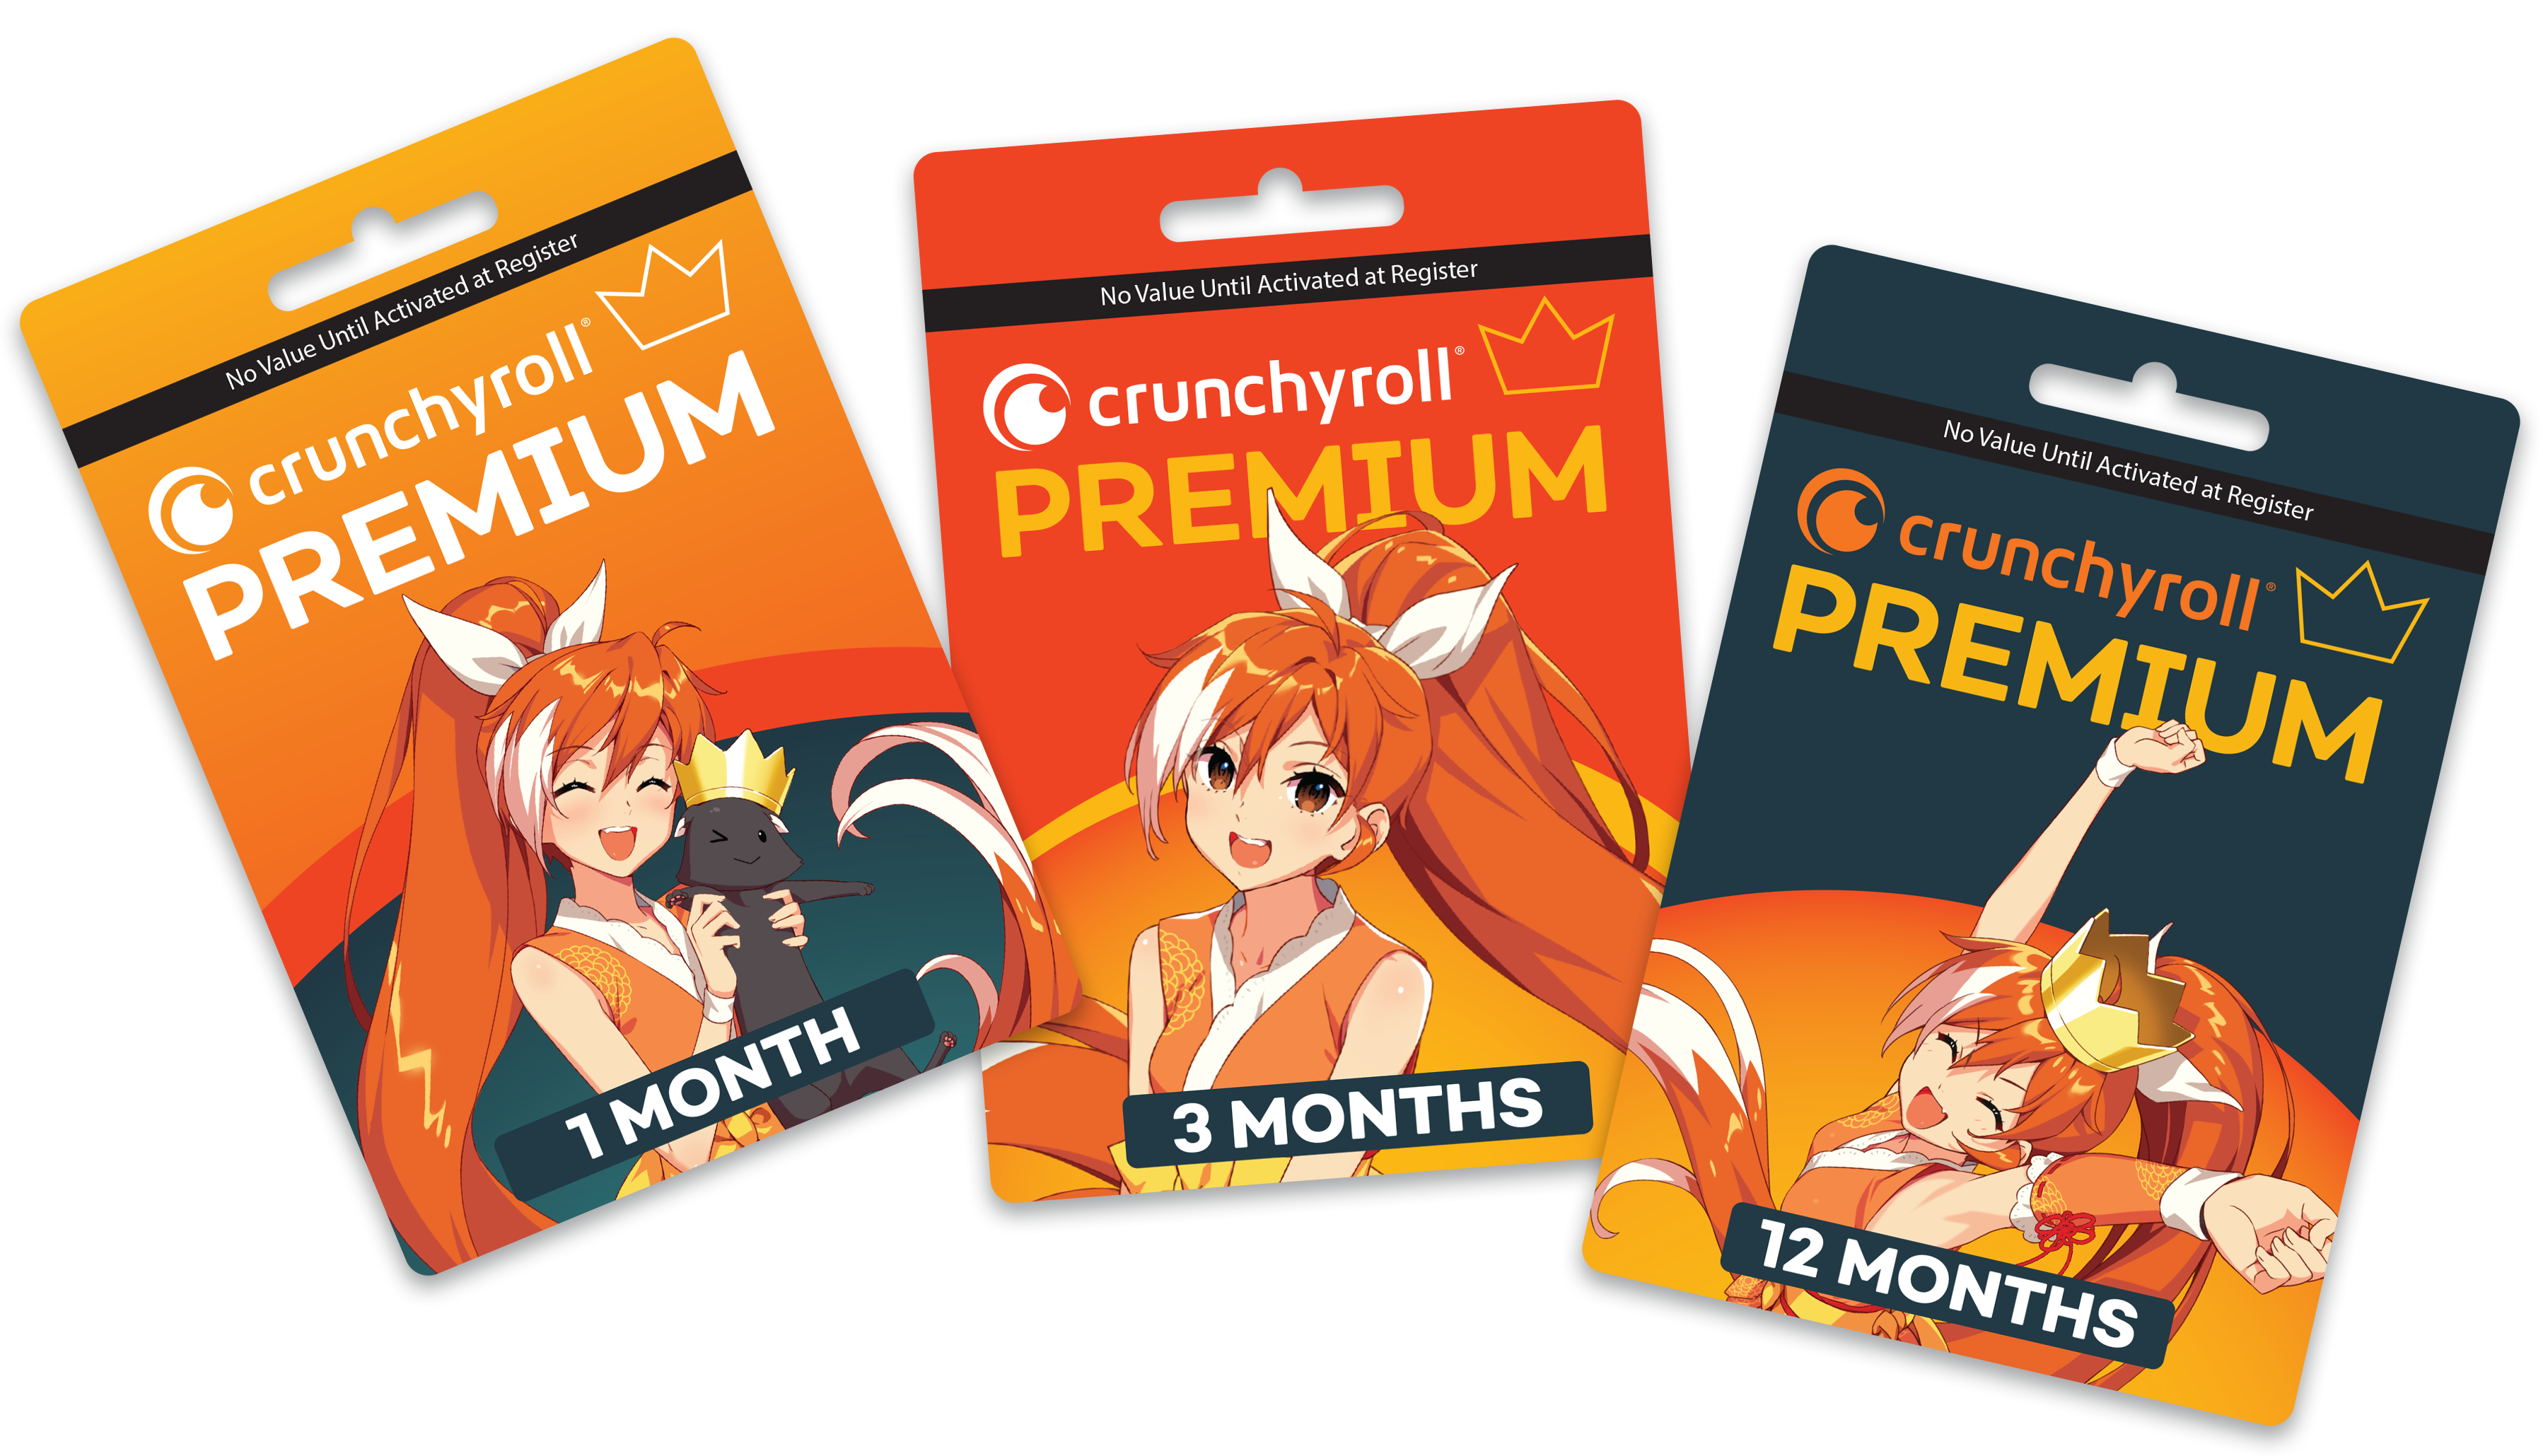 To Crunchyroll's Mitchel Berger, It's All About the Fans